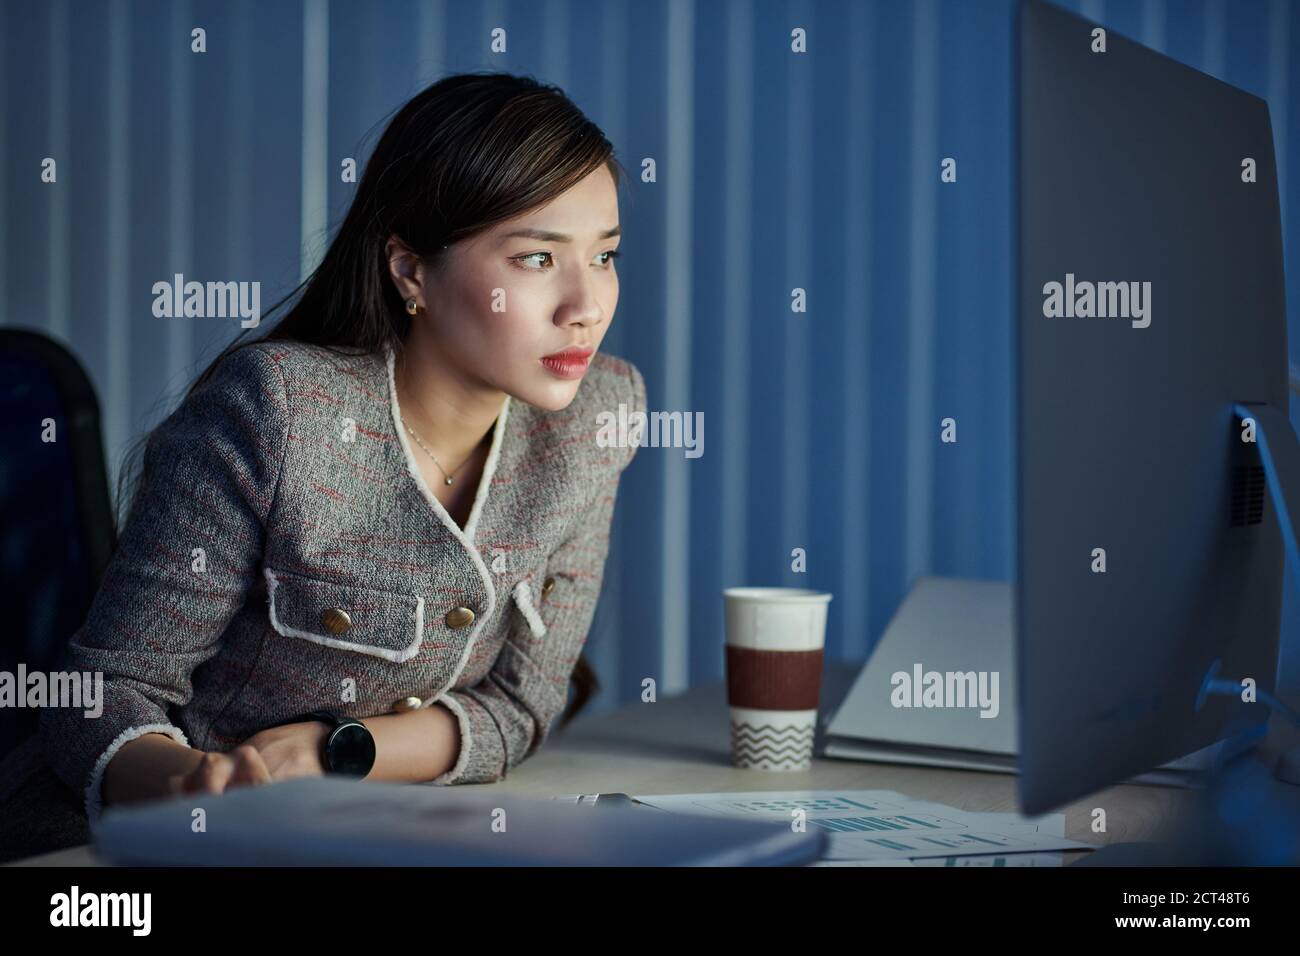 Business lady looking at glowing screen Stock Photo